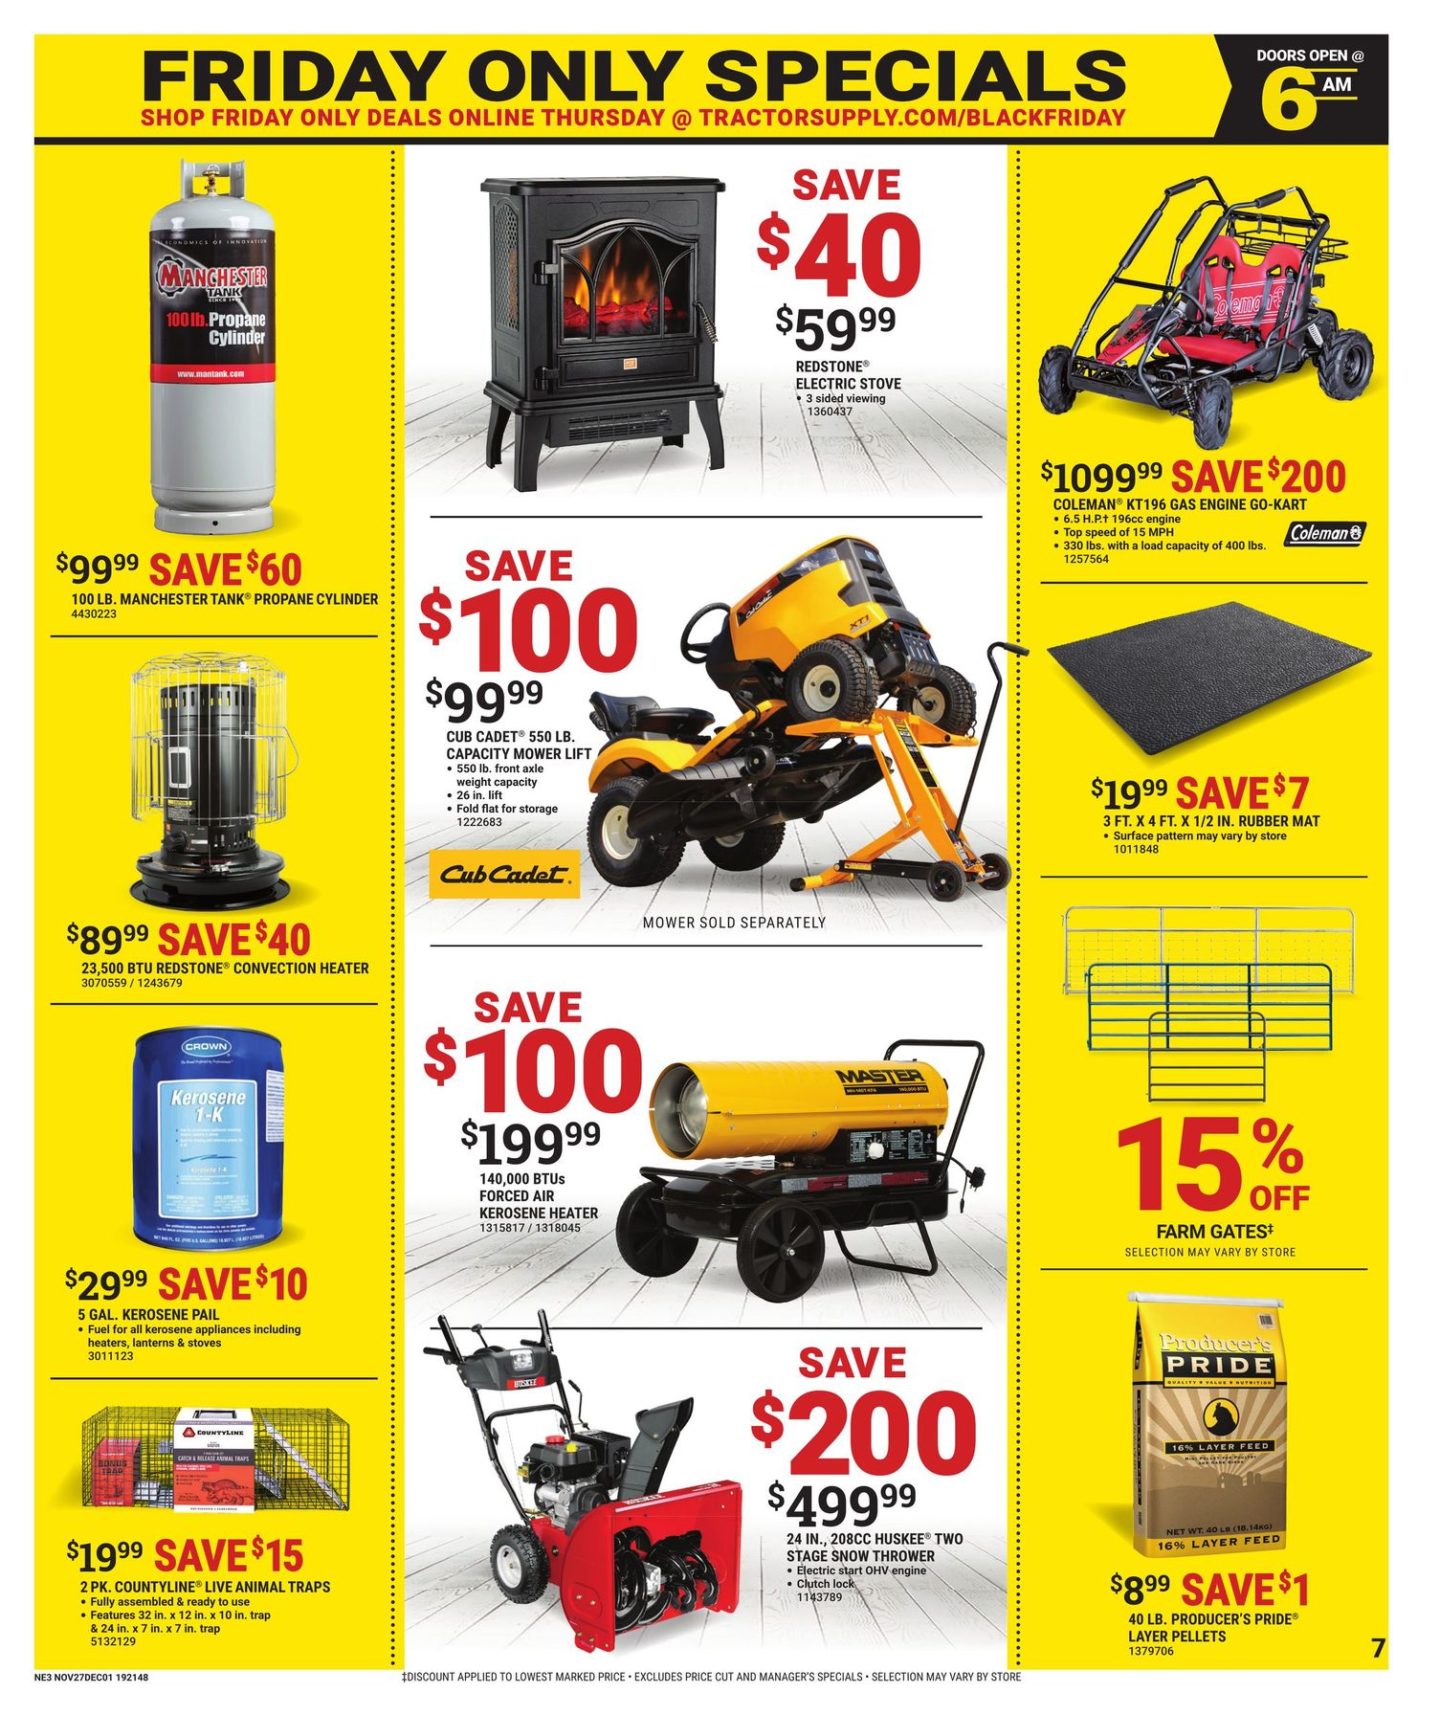 Tractor Supply Black Friday Sale Ad 2020